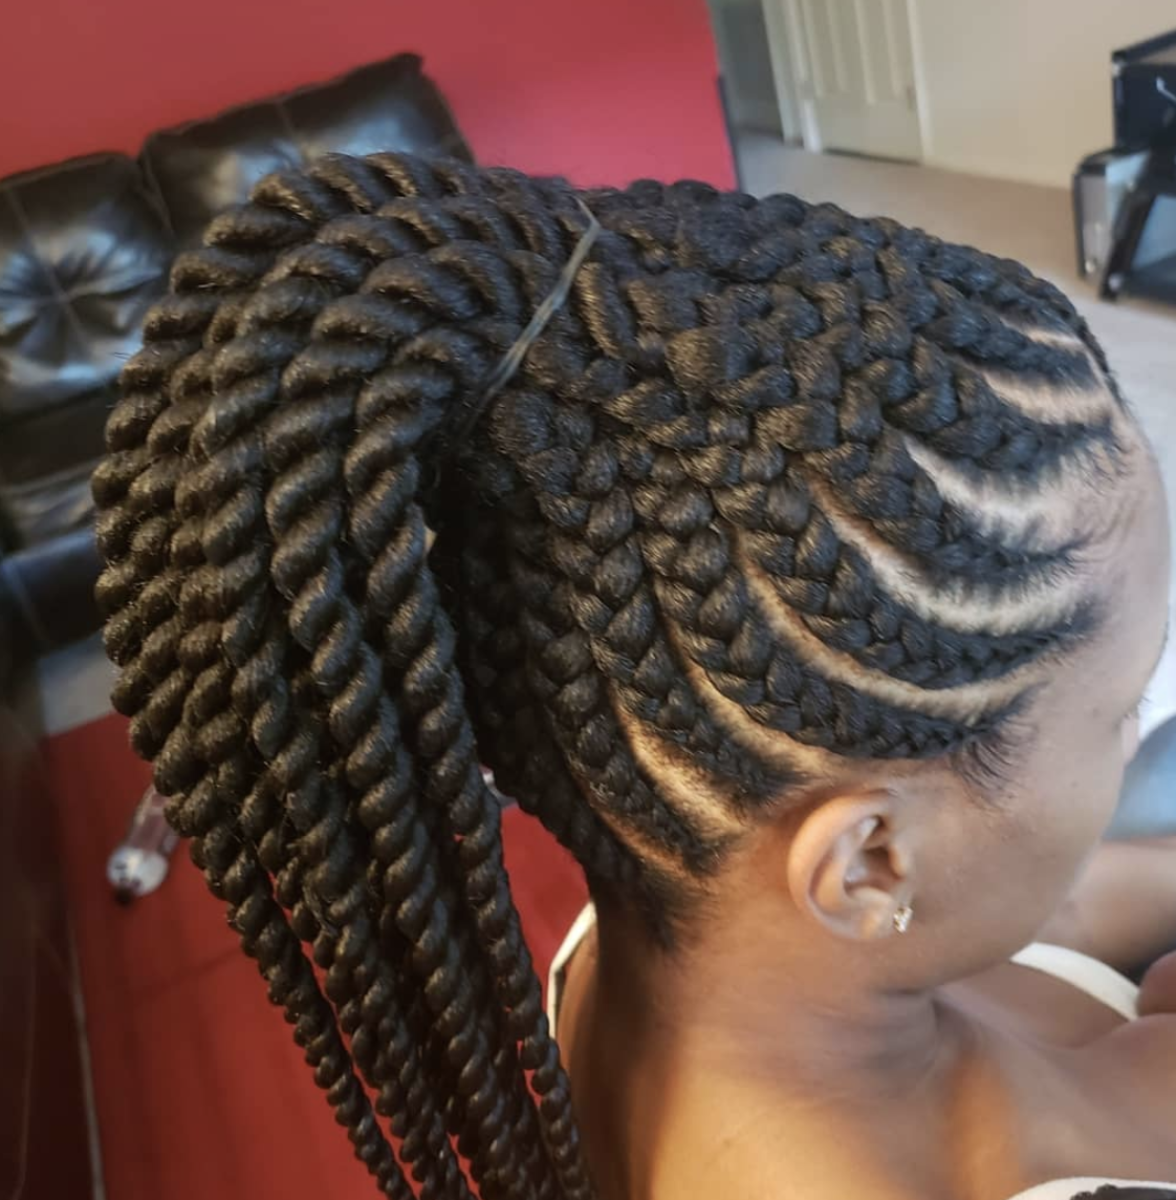 NYC Salon Required To Train Employees On Black Hair Styles - Essence